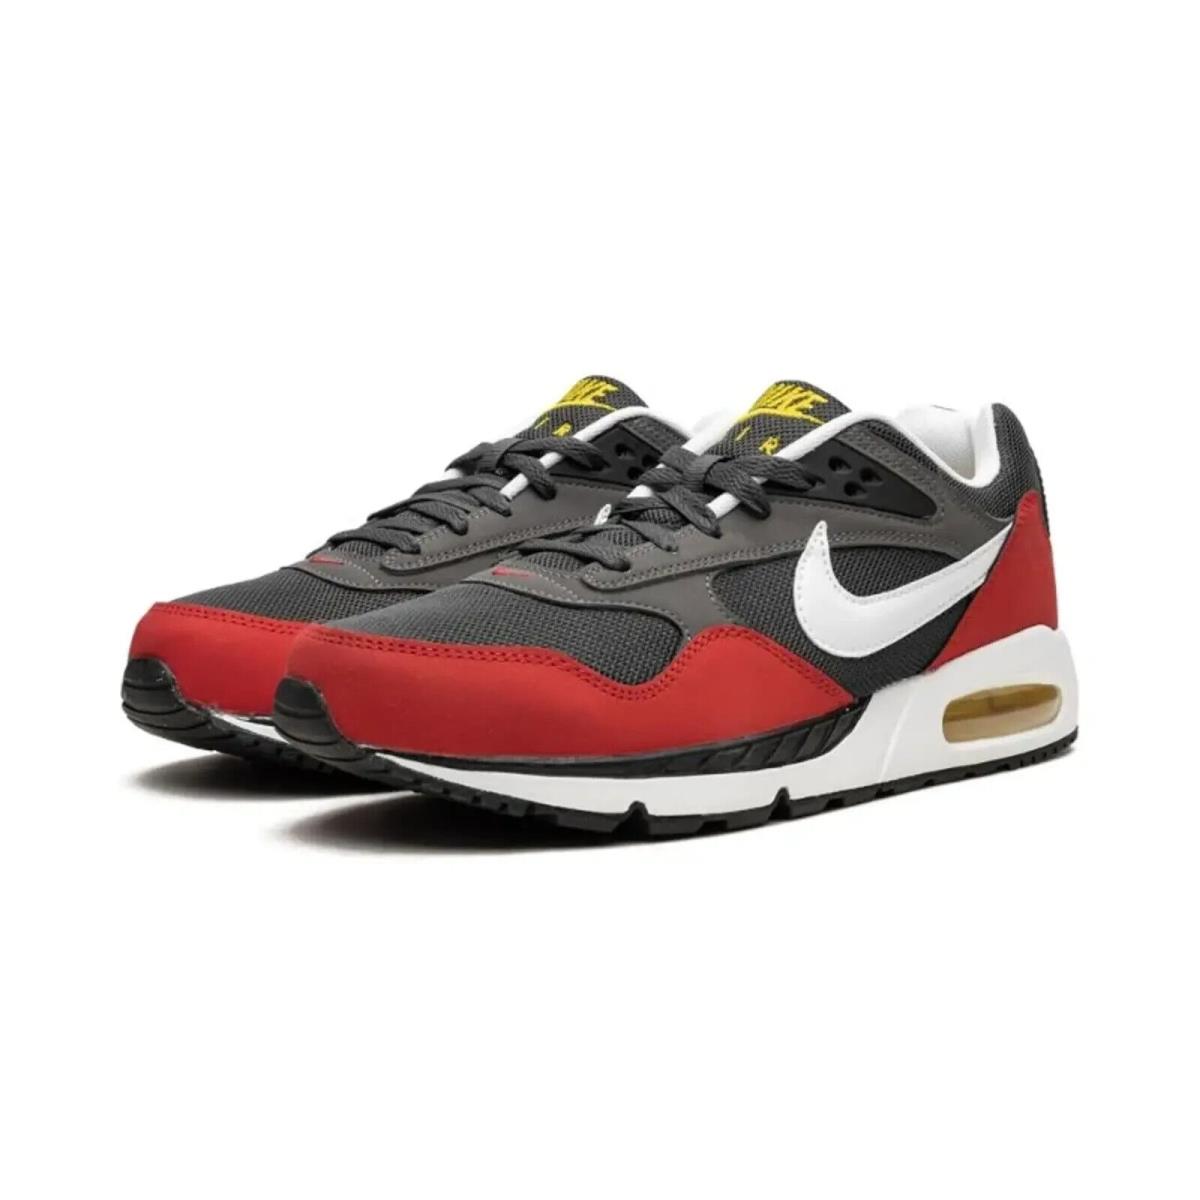 Nike Air Max Correlate 511416-016 Men`s Red/white/black Running Shoes ANK341 11.5